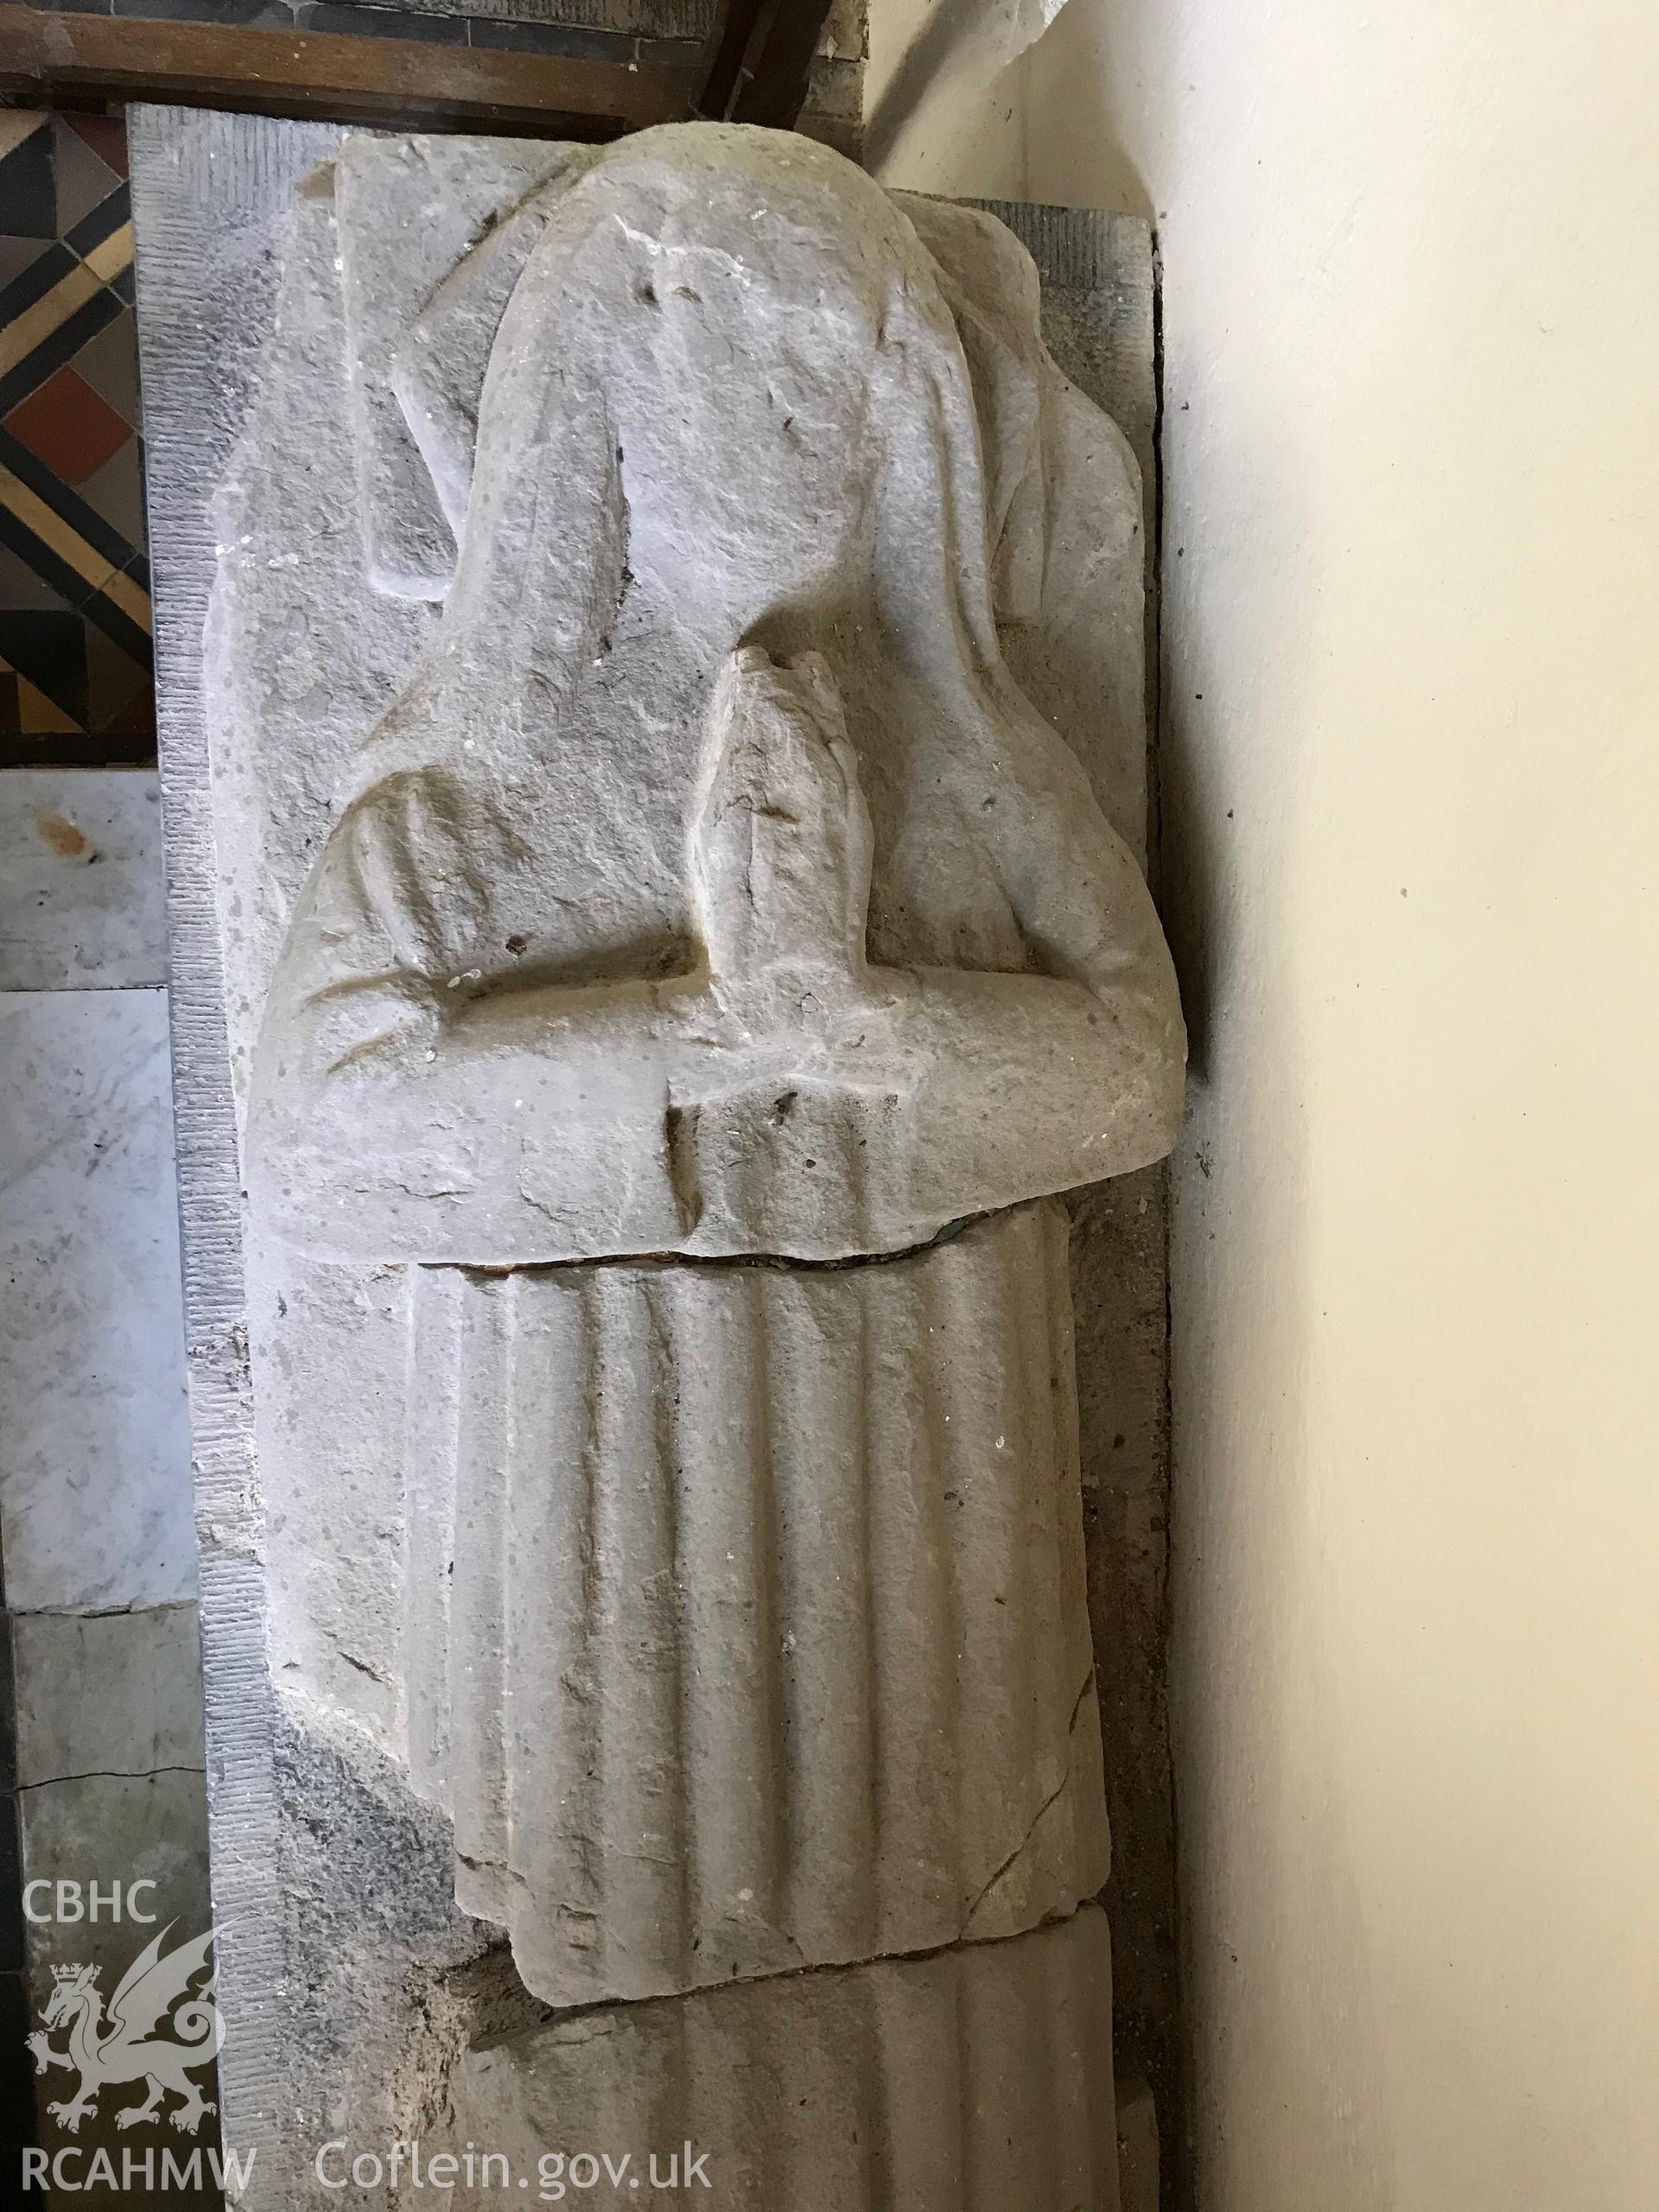 Colour photo showing stone carving in the church of St. Odoceus and St. Margaret Marlos, Llandawke, taken by Paul R. Davis, 6th May 2018.